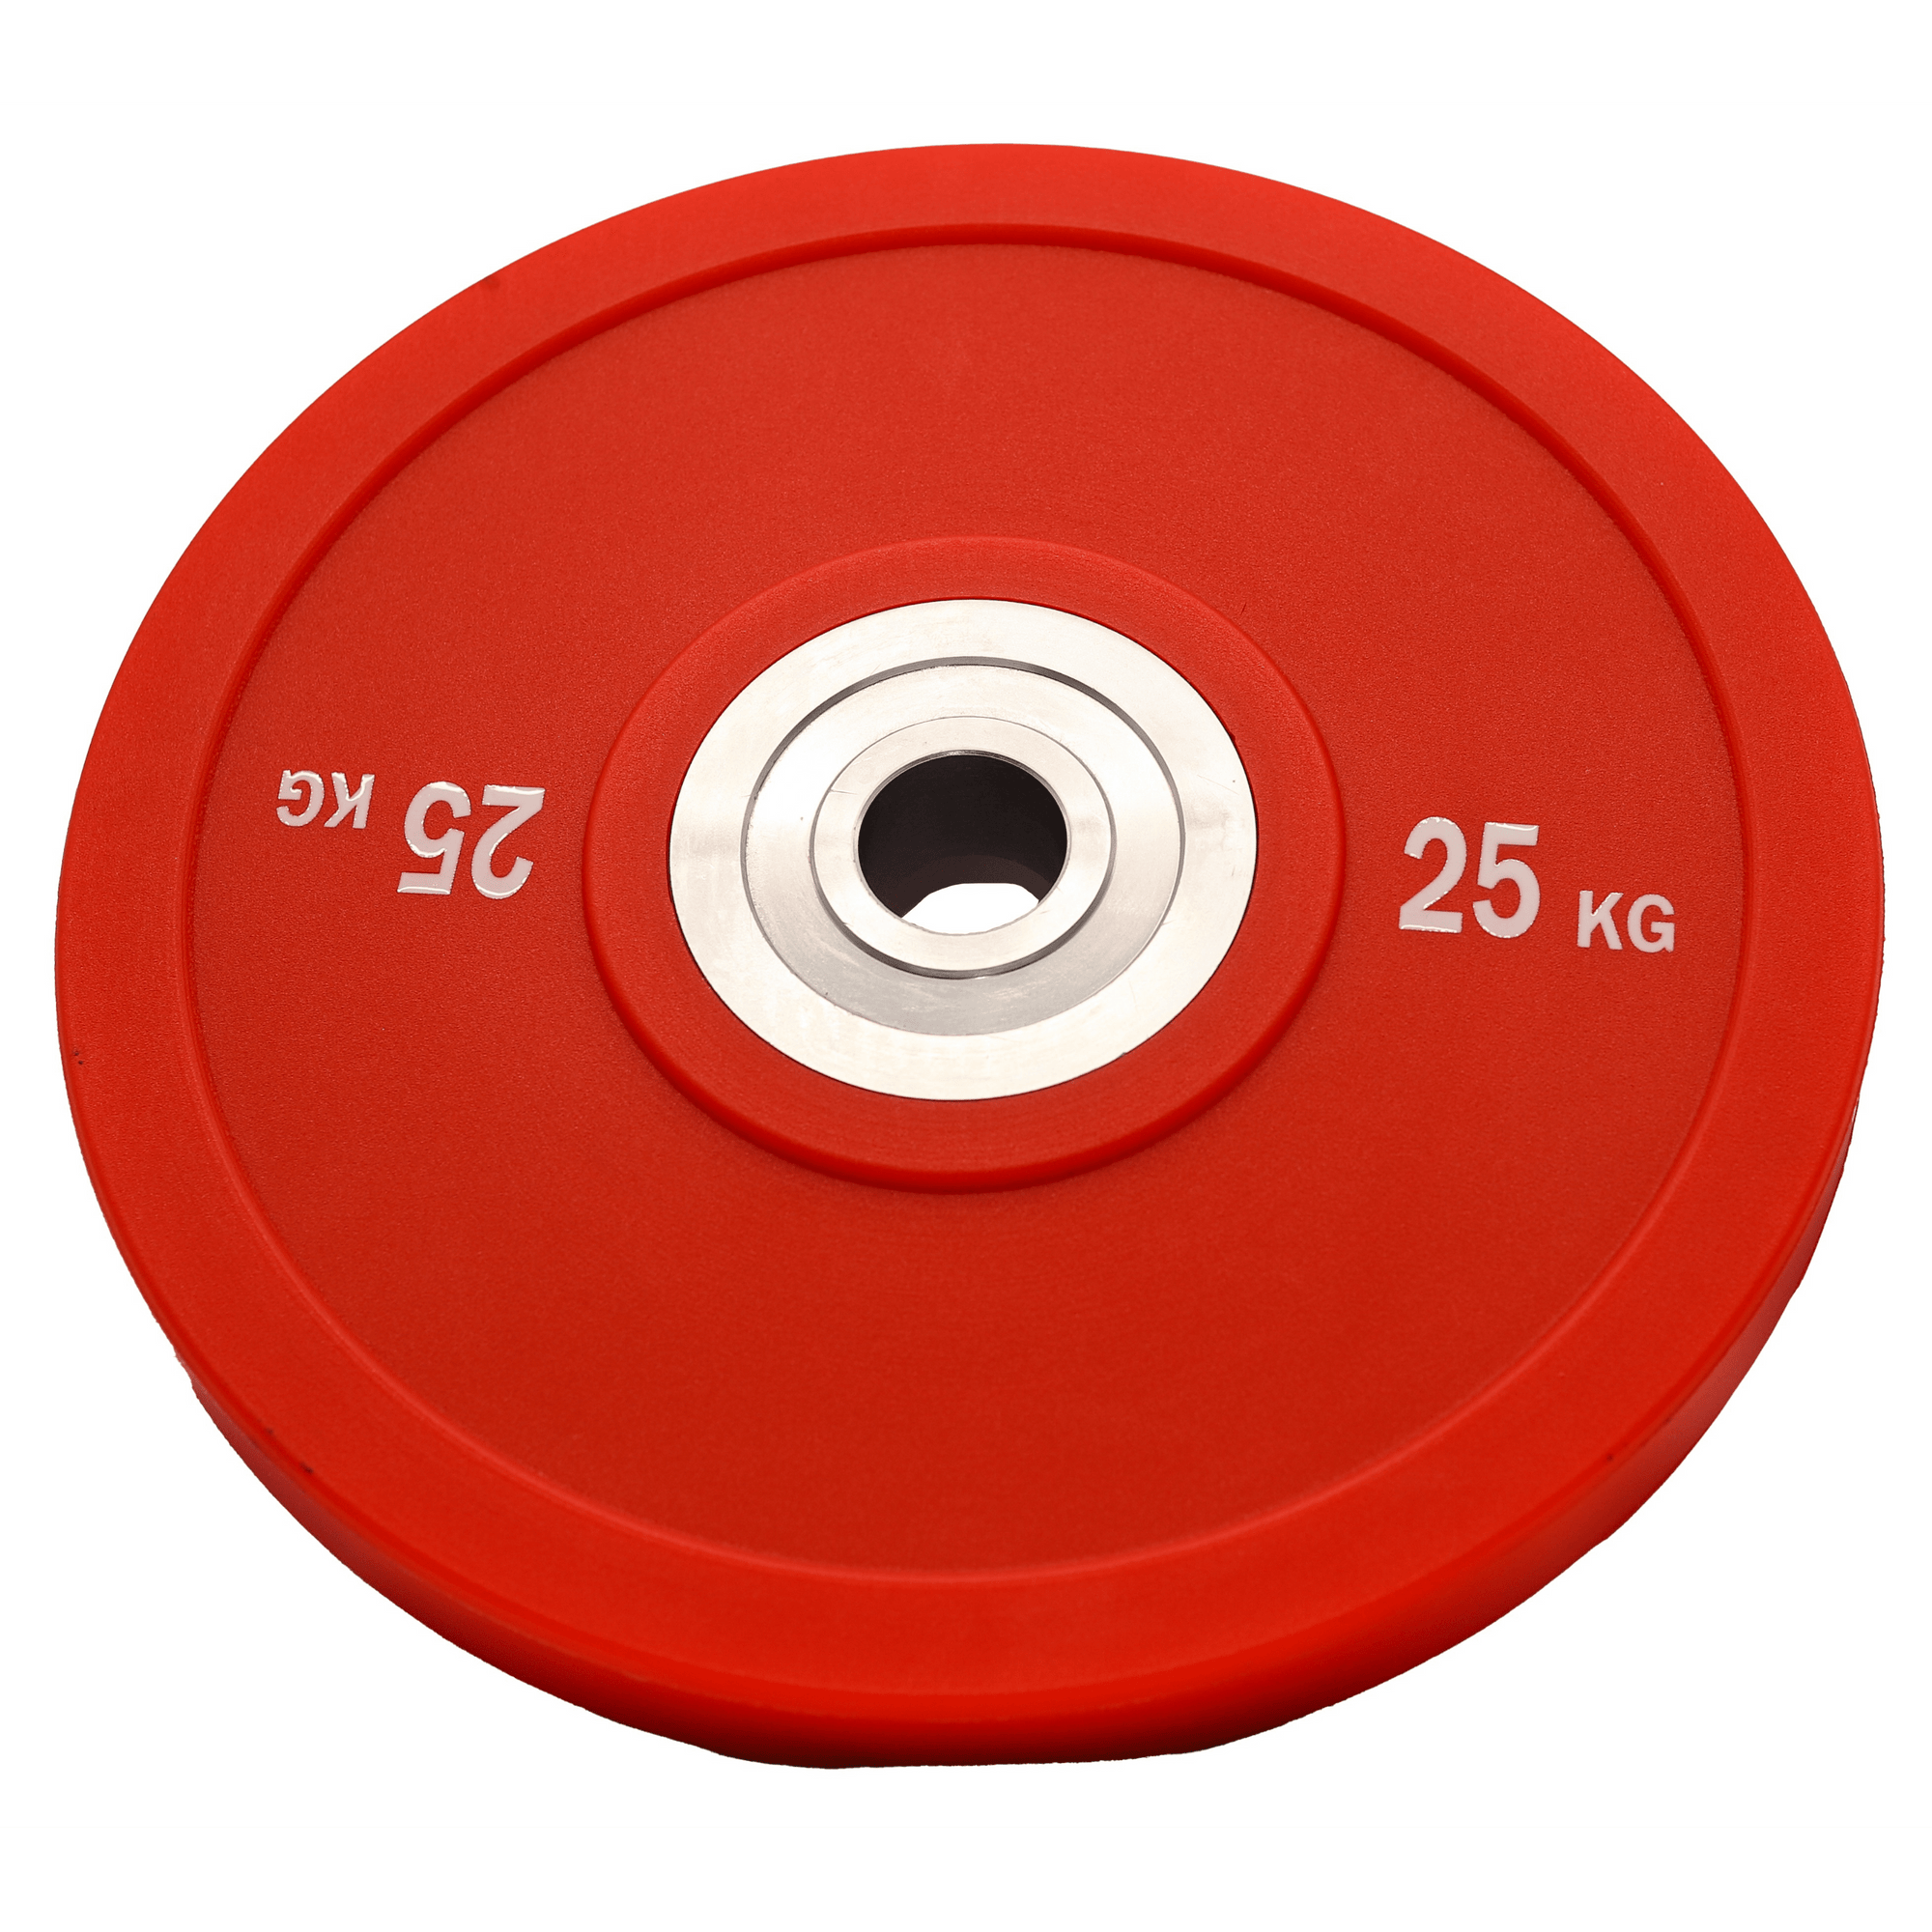 Fit It Out Shipment14 Urethane Competition Bumper Plates - Pairs